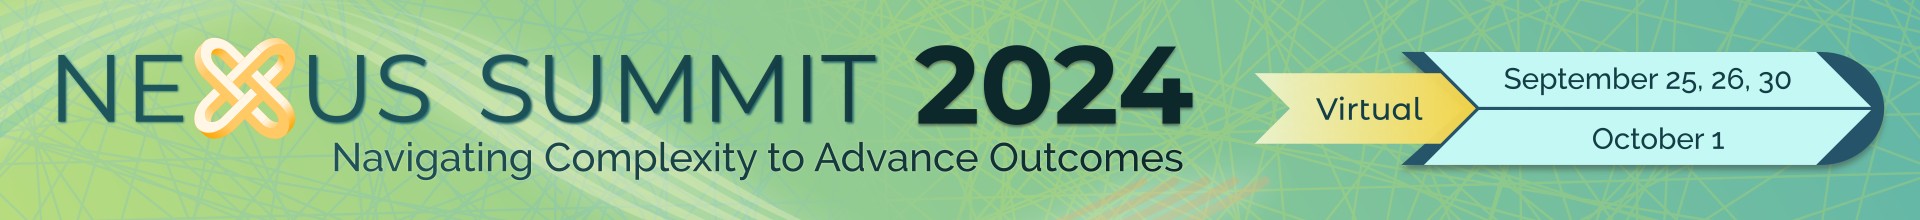 Nexus Summit 2024: Navigating Complexity to Advance Outcomes Event Banner